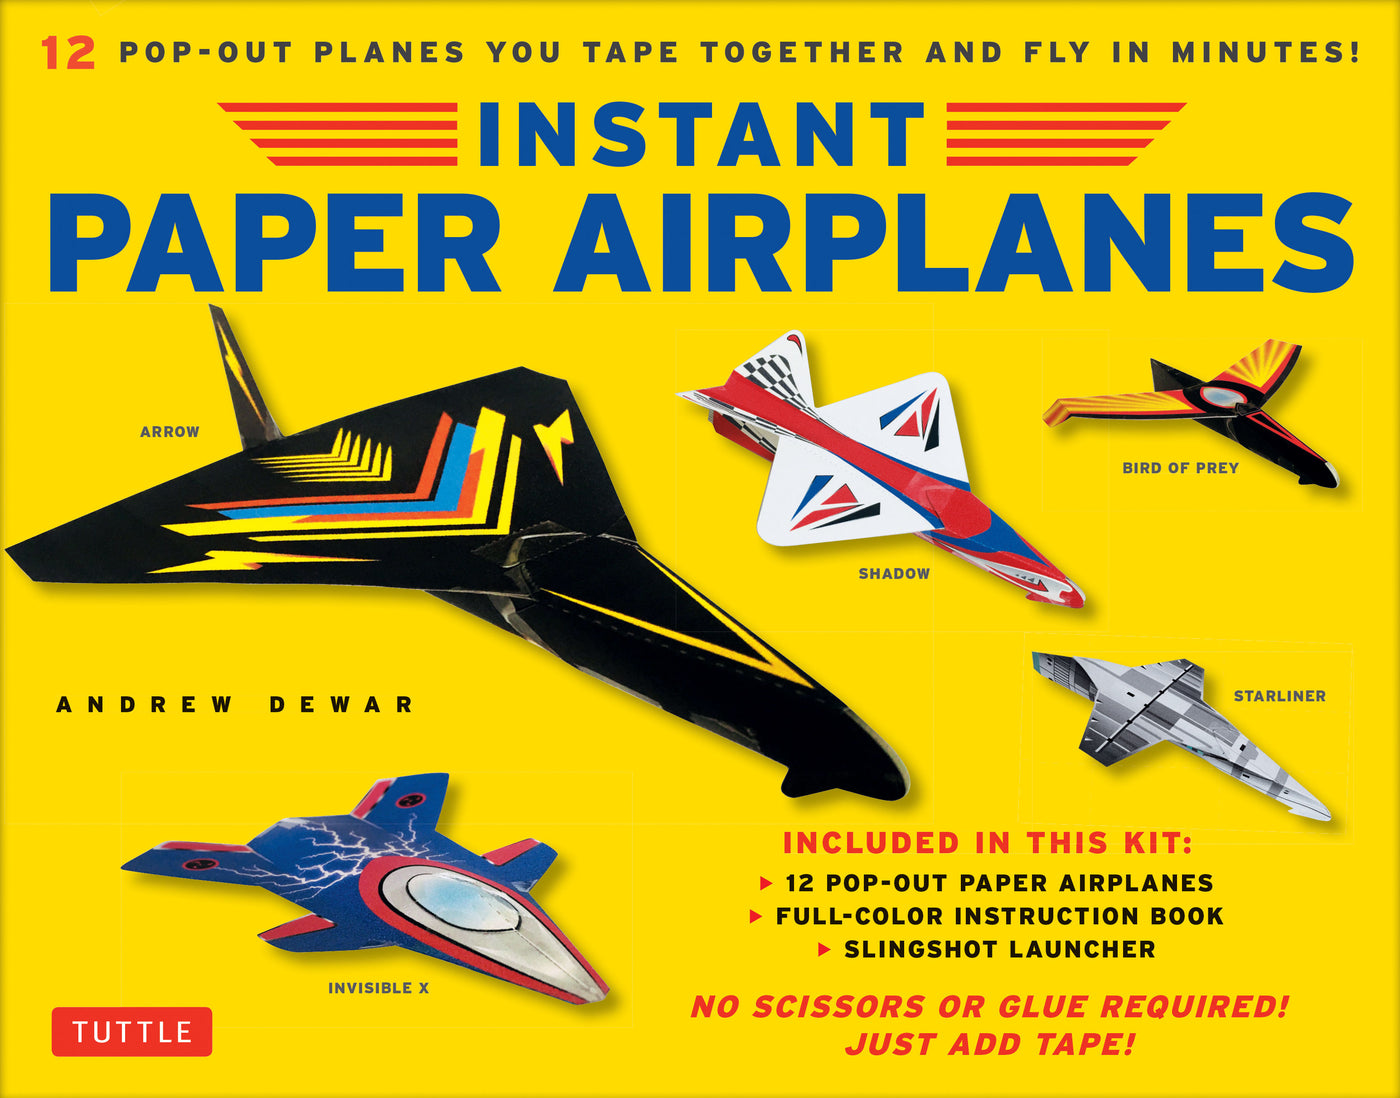 Instant Paper Airplanes Kit: 12 Pop-out Airplanes You Tape Together and Fly in Minutes!